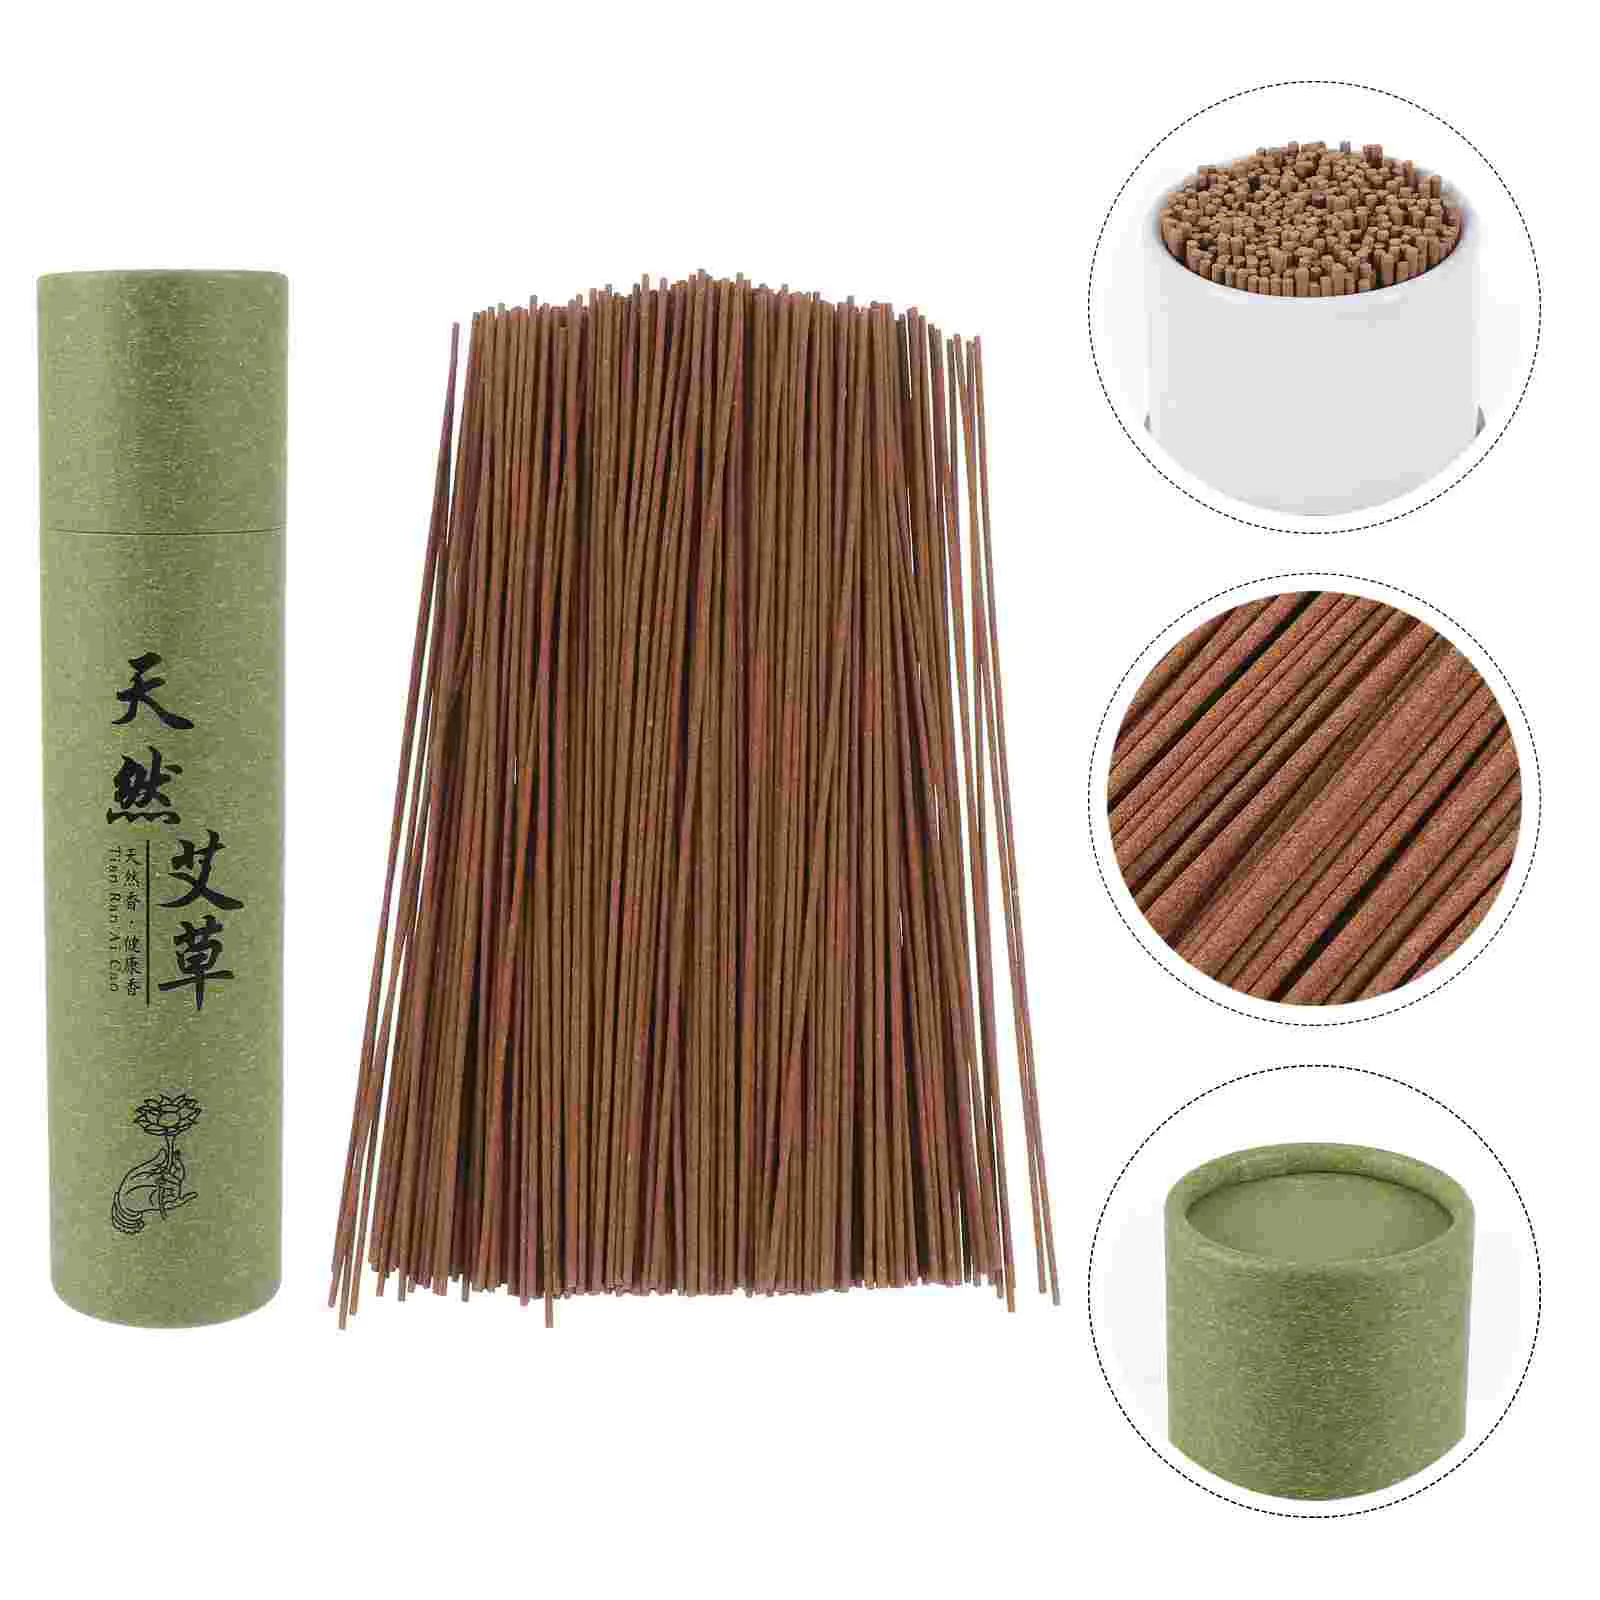 

Stickswormwood Oil Diffuser Reed Organic Wood Aroma Essential Cones Traditional Relaxation Burningnatural Fragrance Rattan